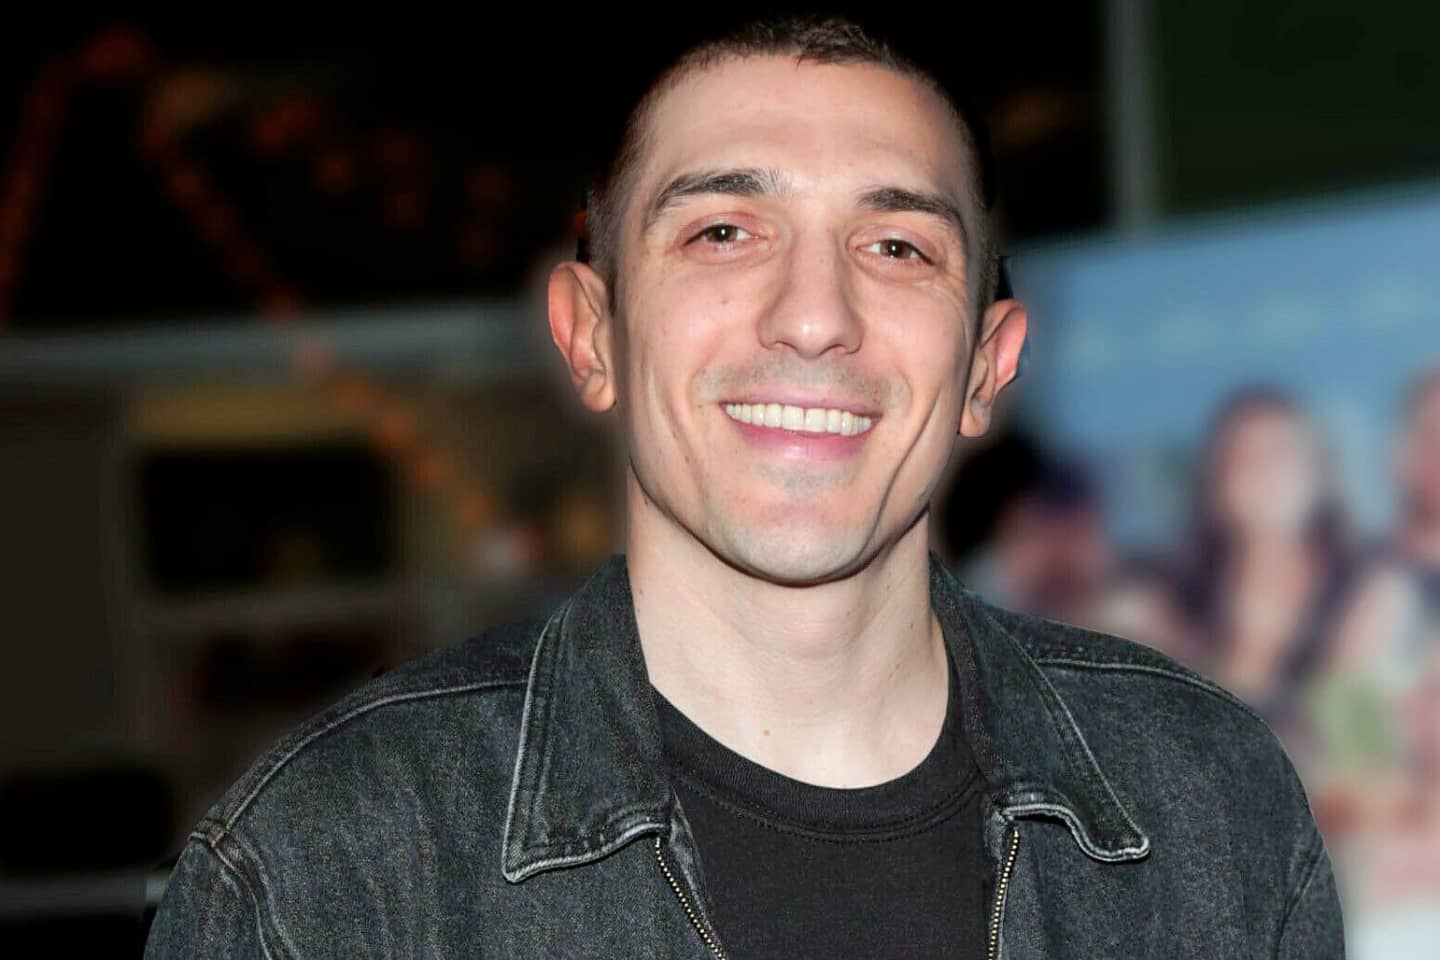 Andrew Schulz Tickets Buy or Sell Tickets for Andrew Schulz Tour